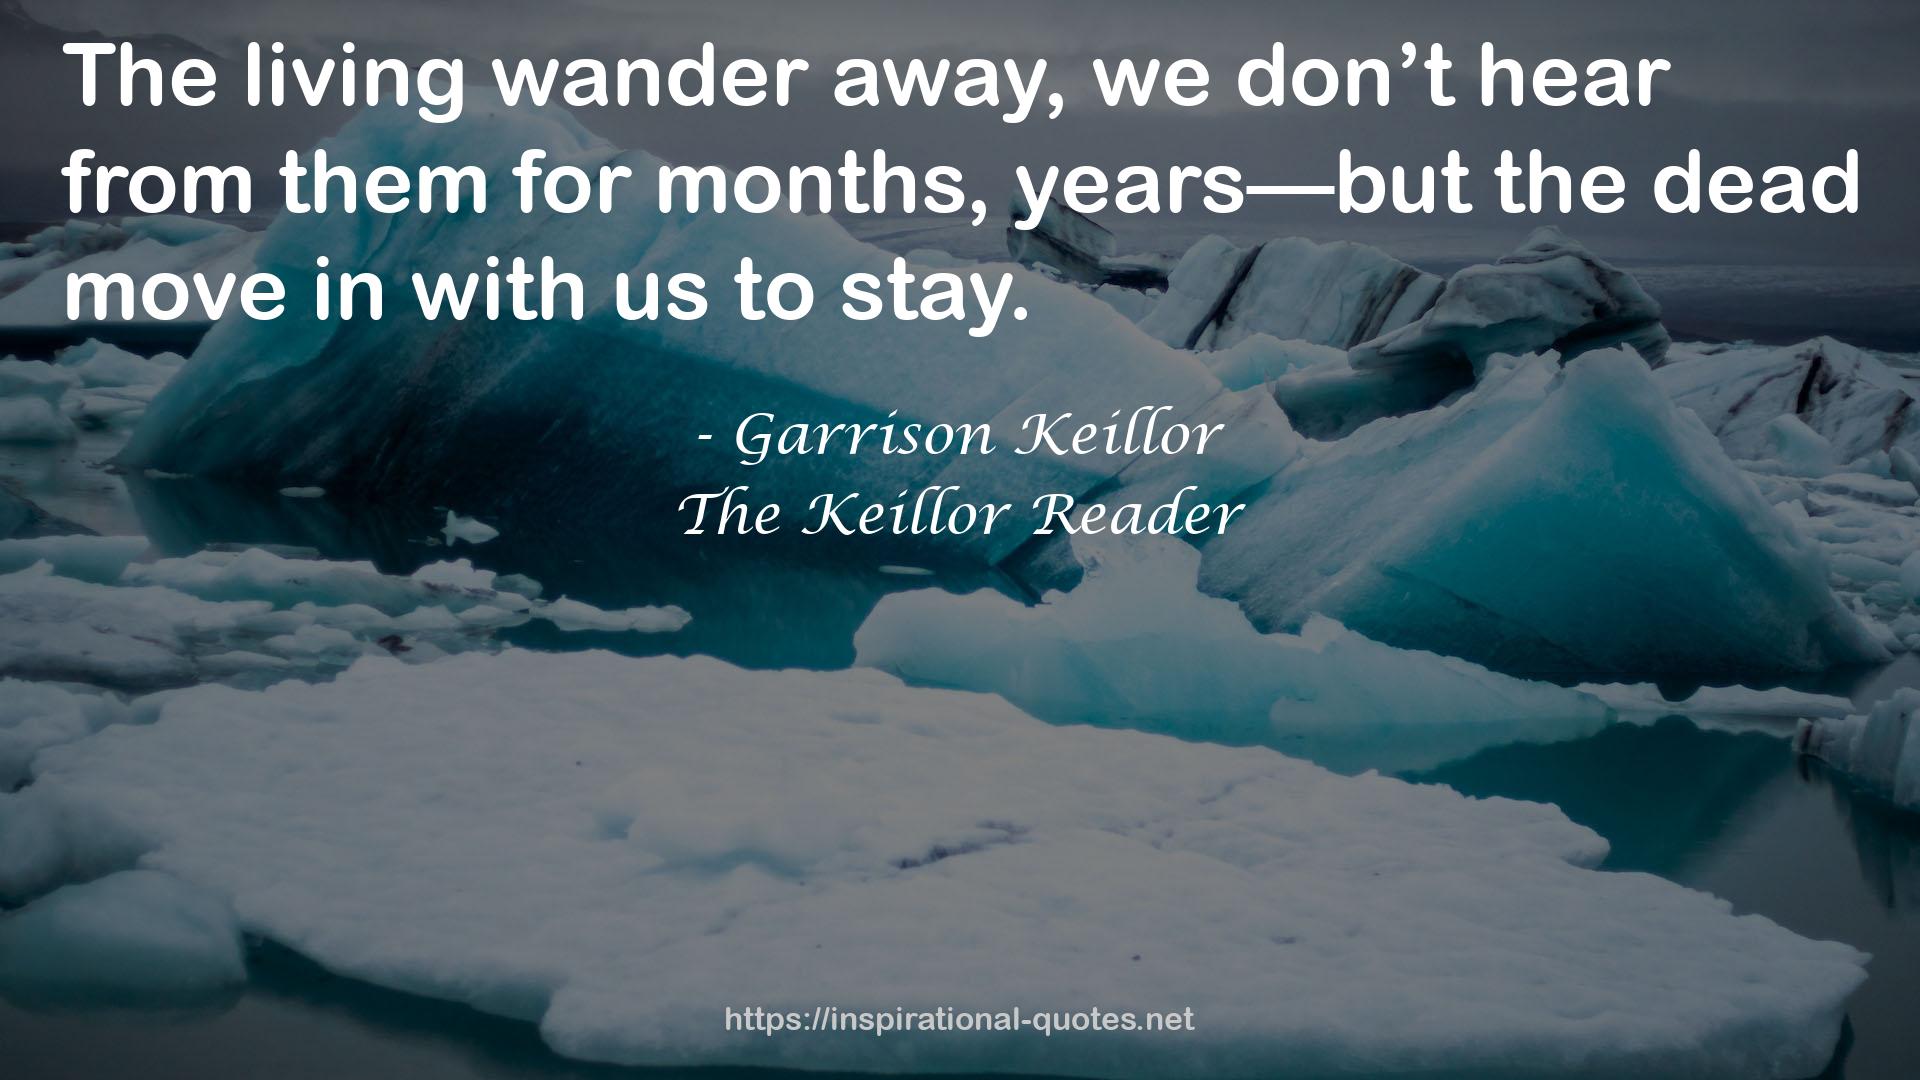 The Keillor Reader QUOTES